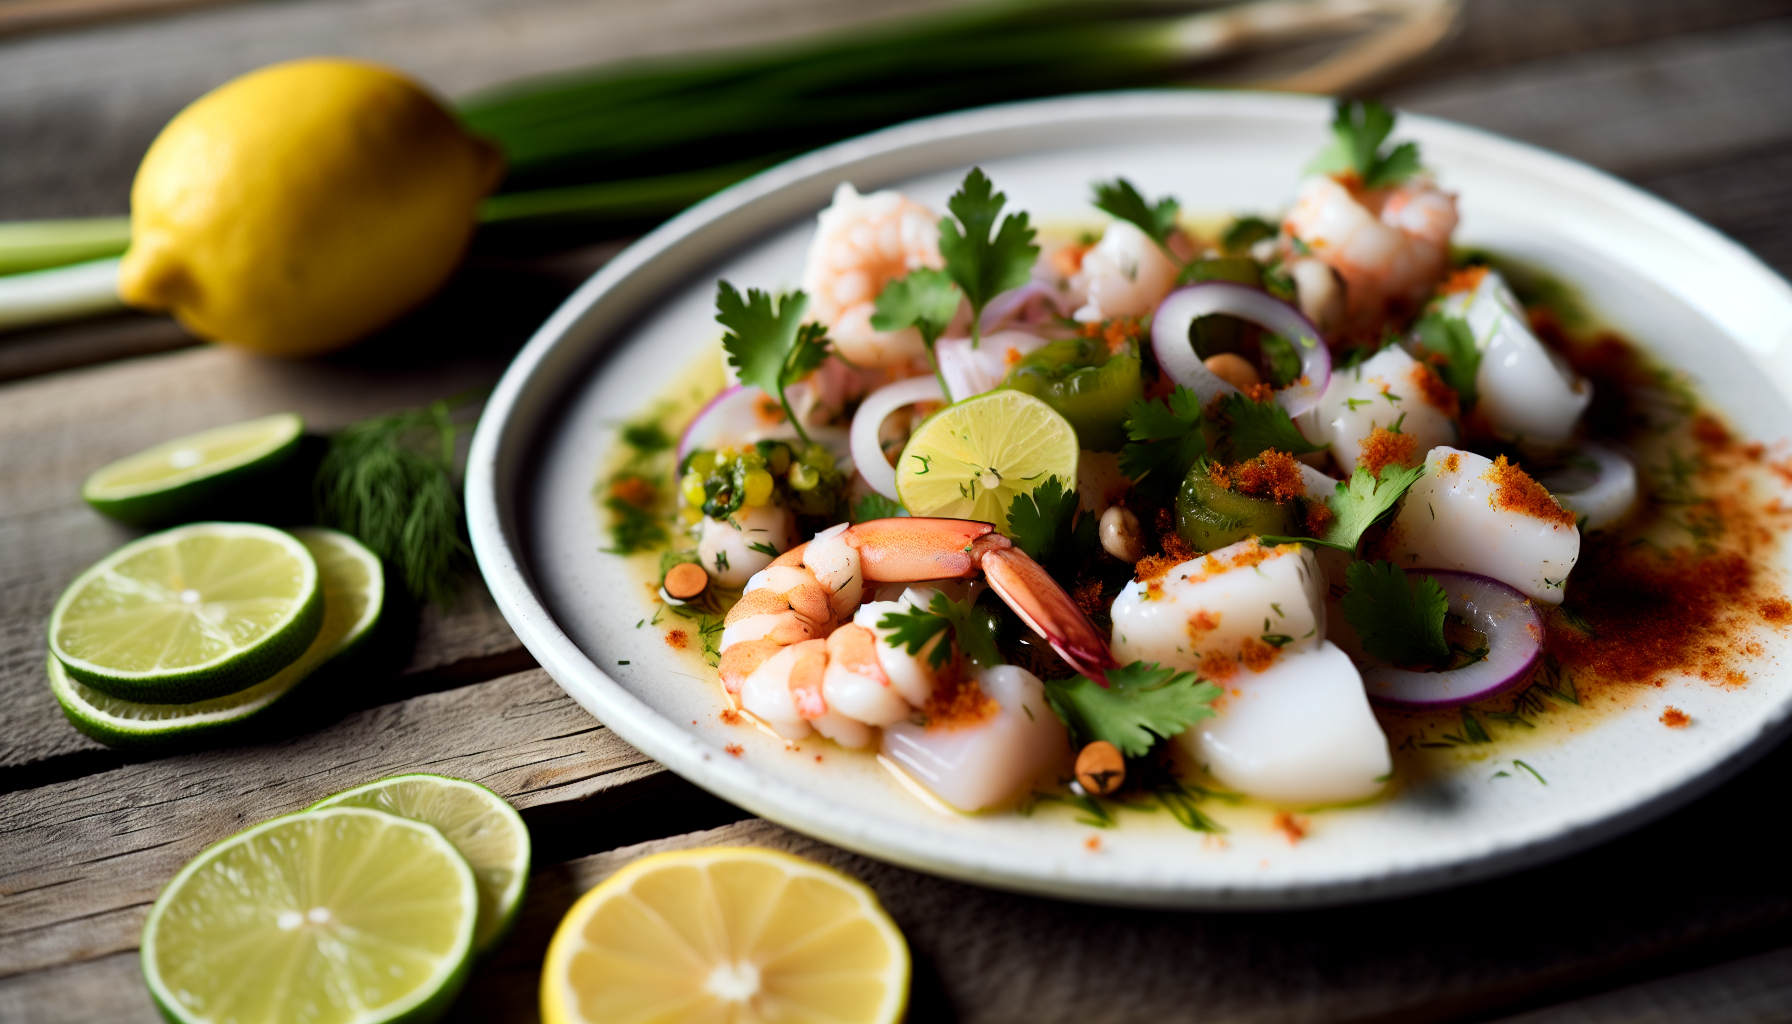 A tantalizing platter of freshly prepared ceviche